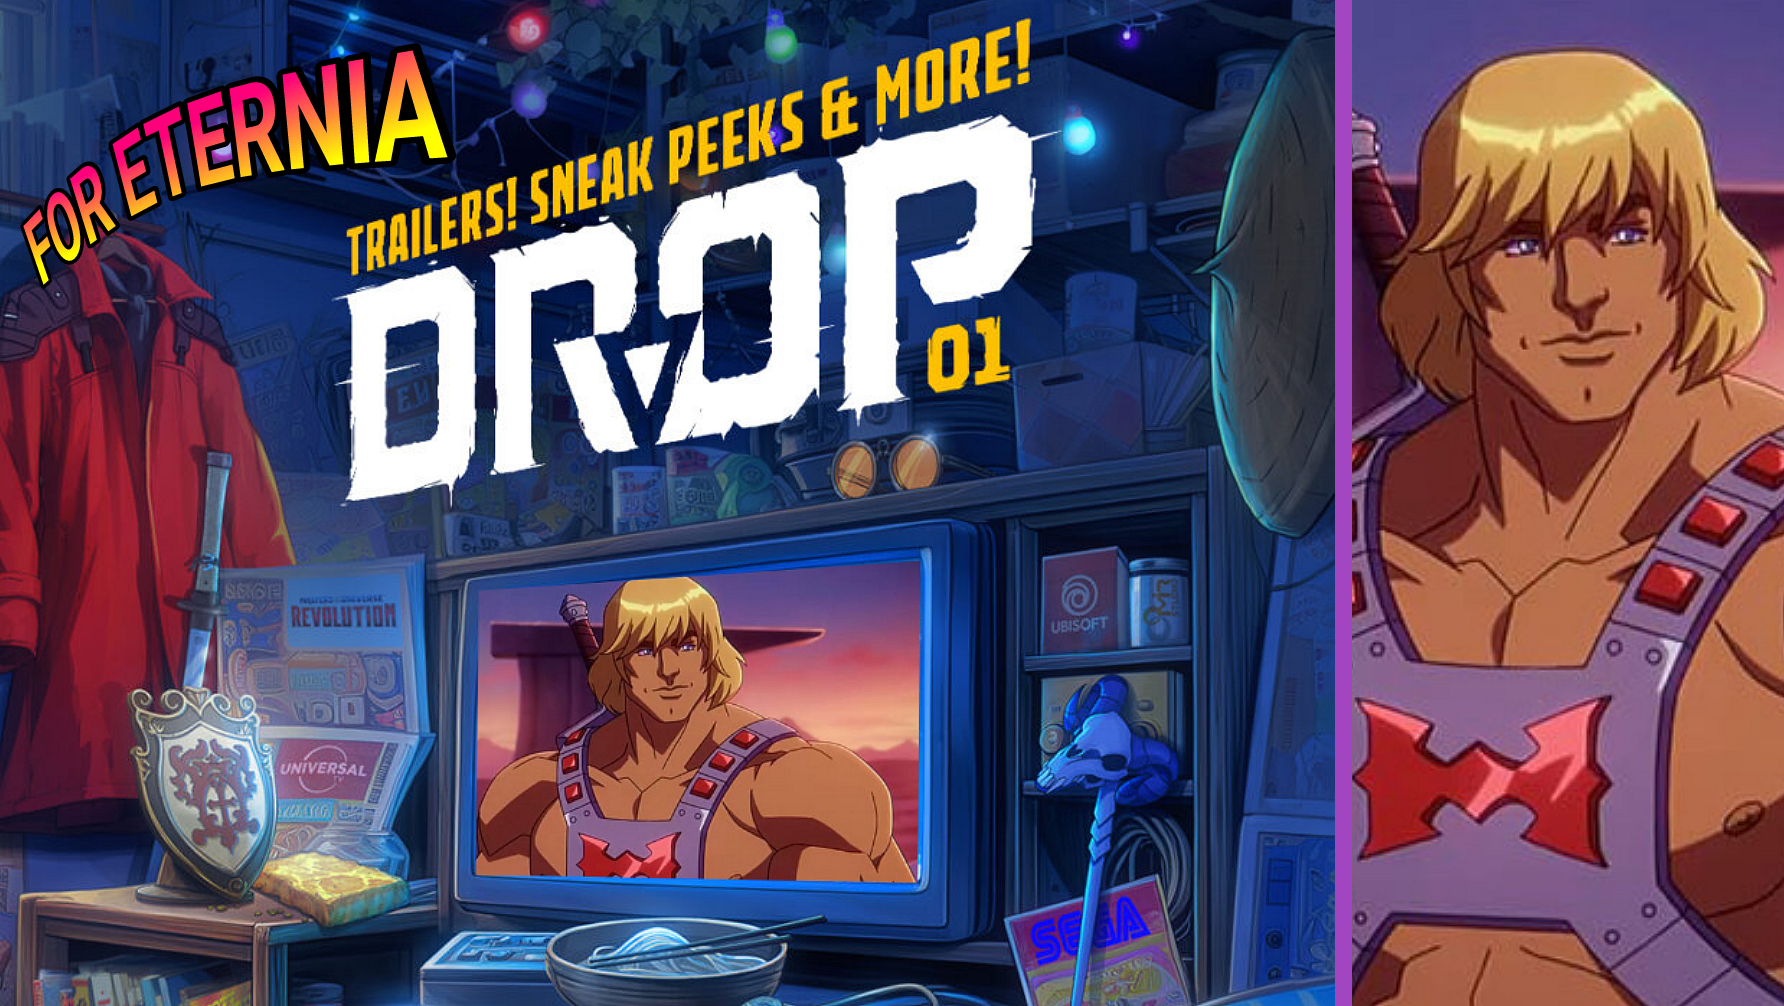 ”Masters of the Universe: Revolution” will be featured at DROP 01 Event